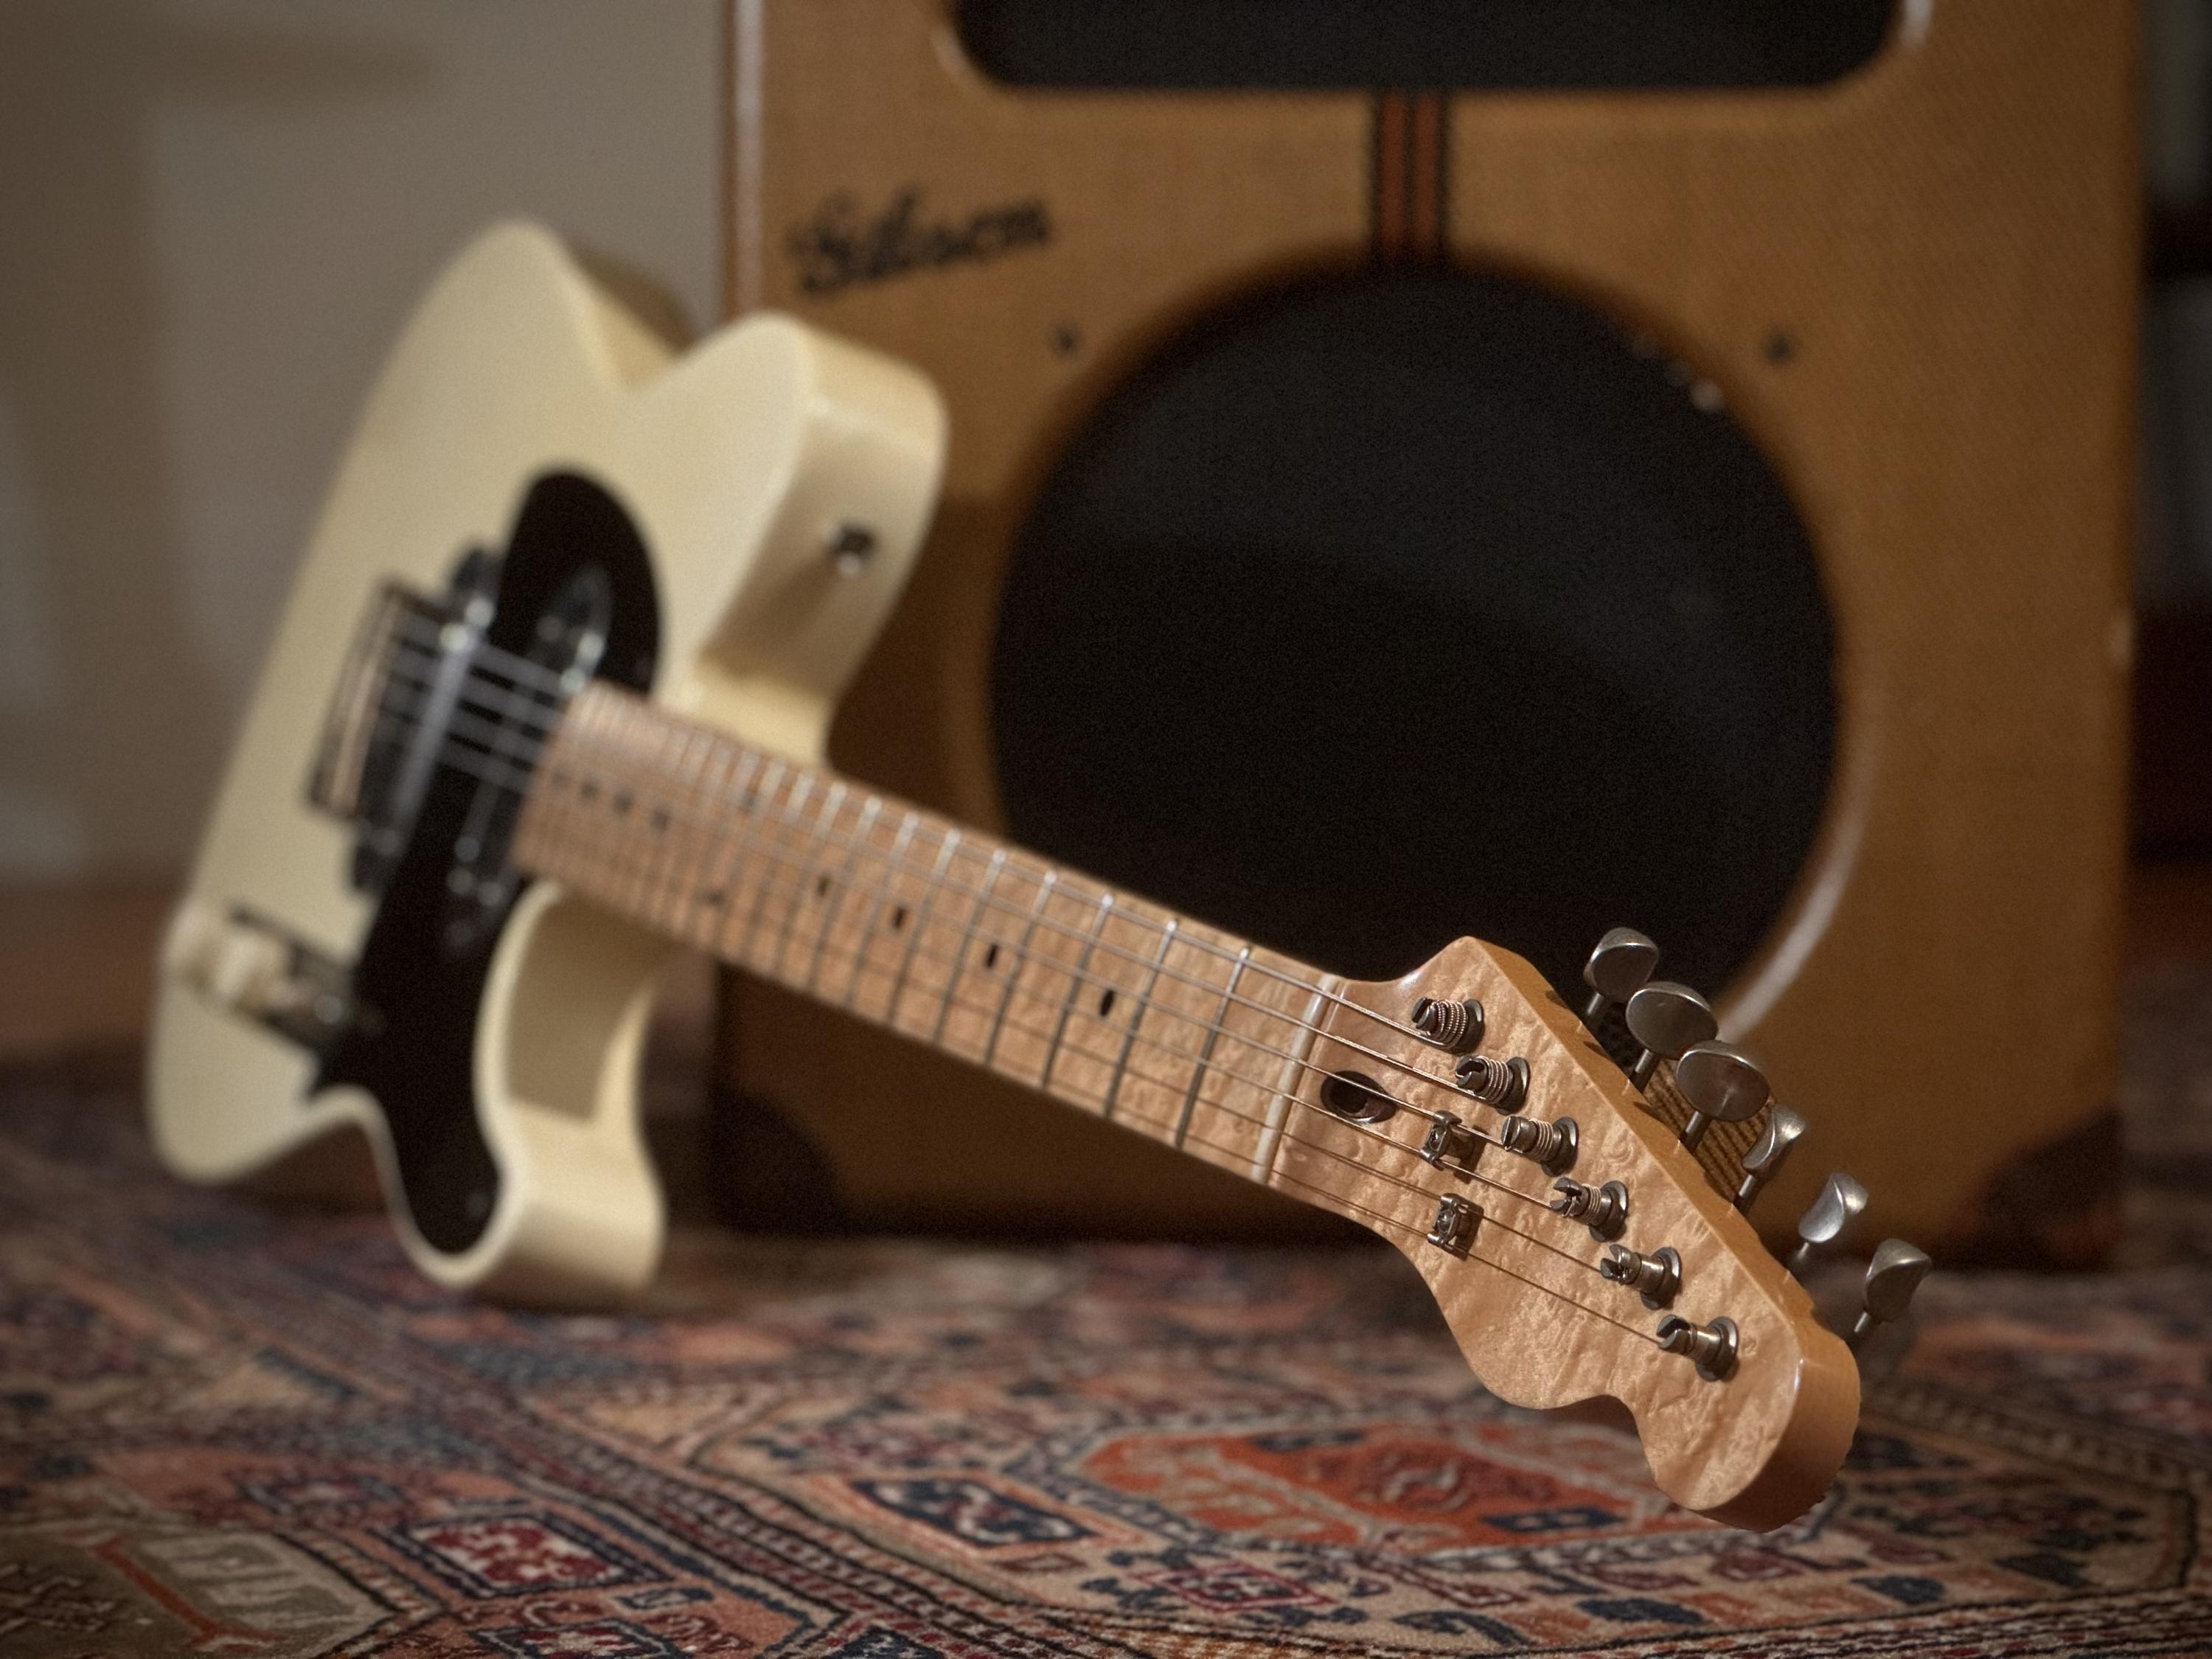 Telecaster Love Thread, No Archtops Allowed-img_9663-jpg